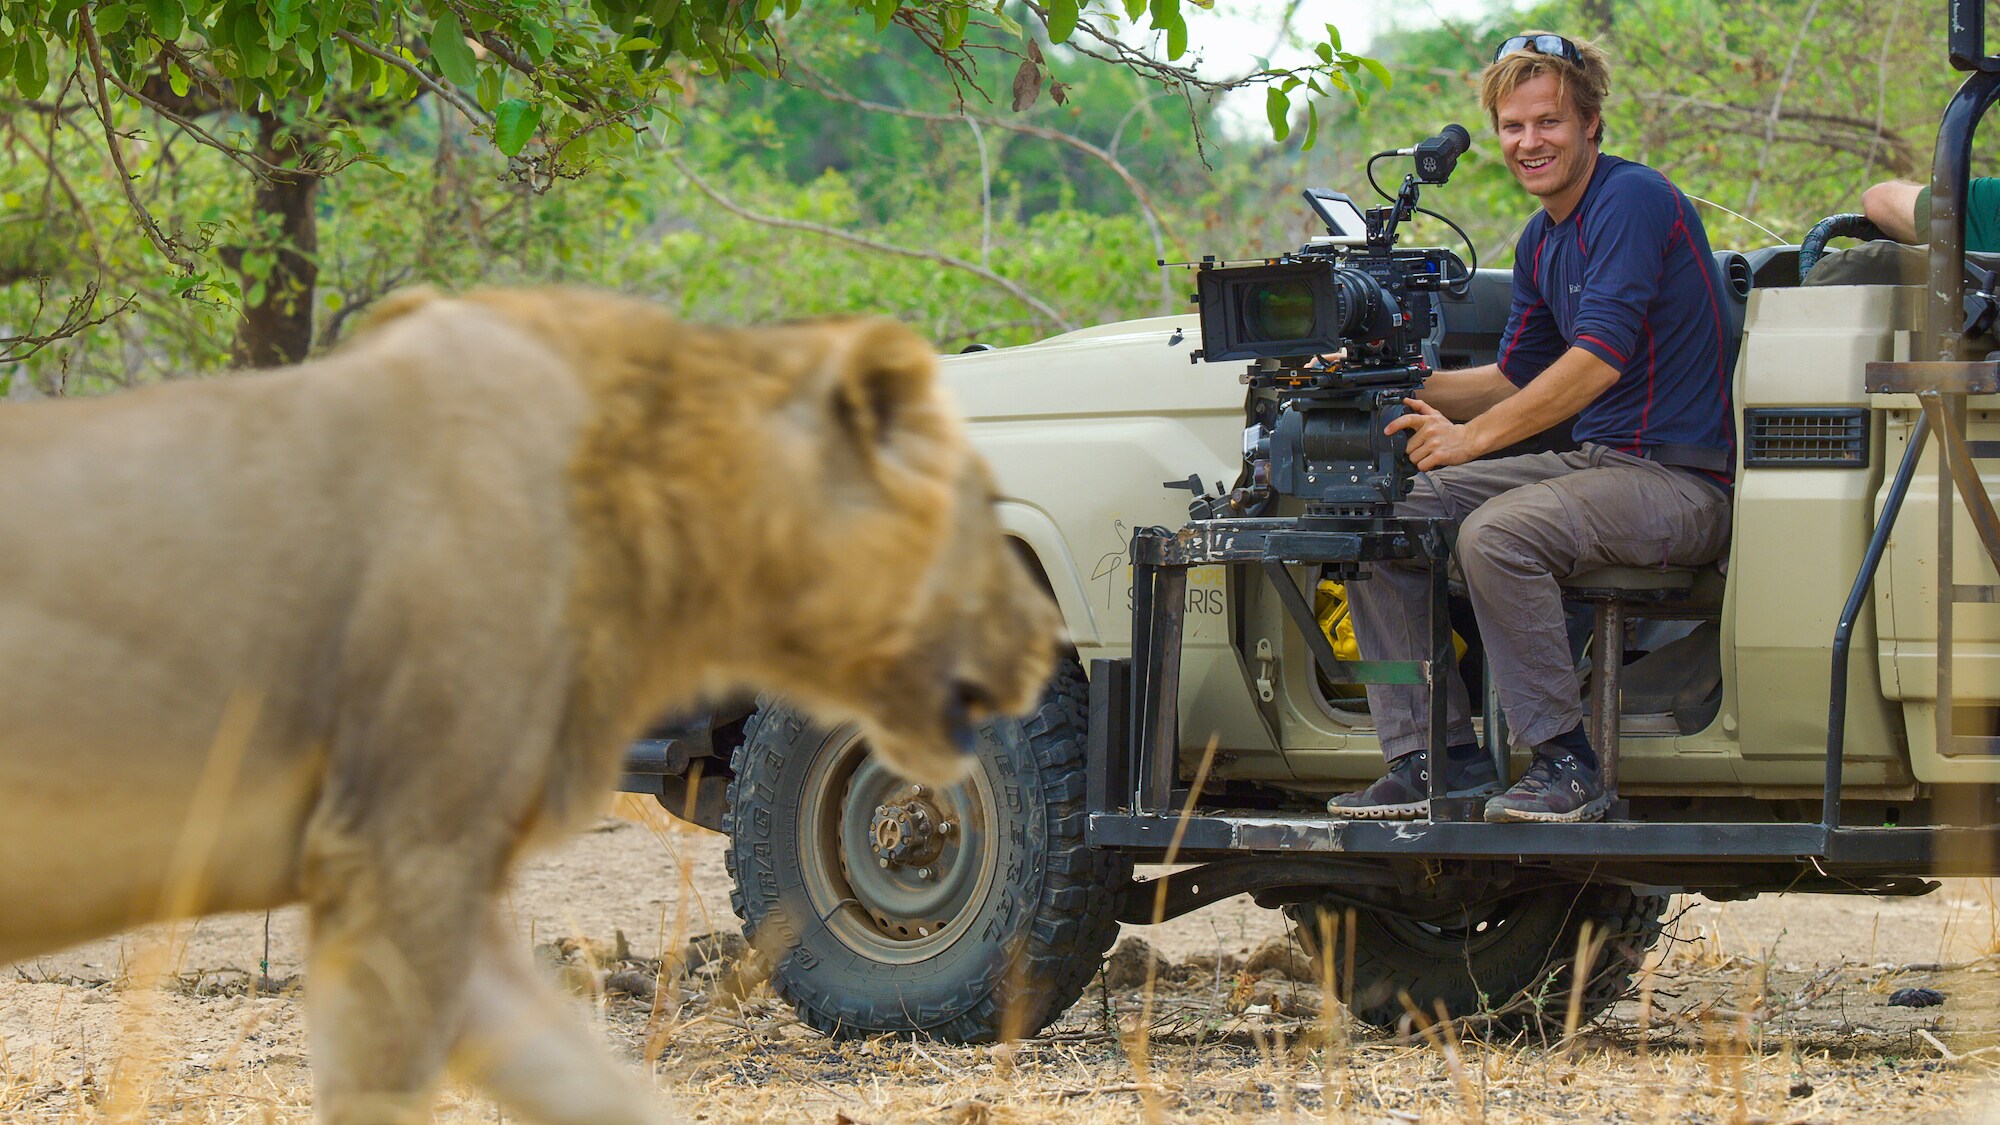 Bertie Gregory looks on as a male lion walks past the filming vehicle. (Credit: National Geographic for Disney+)